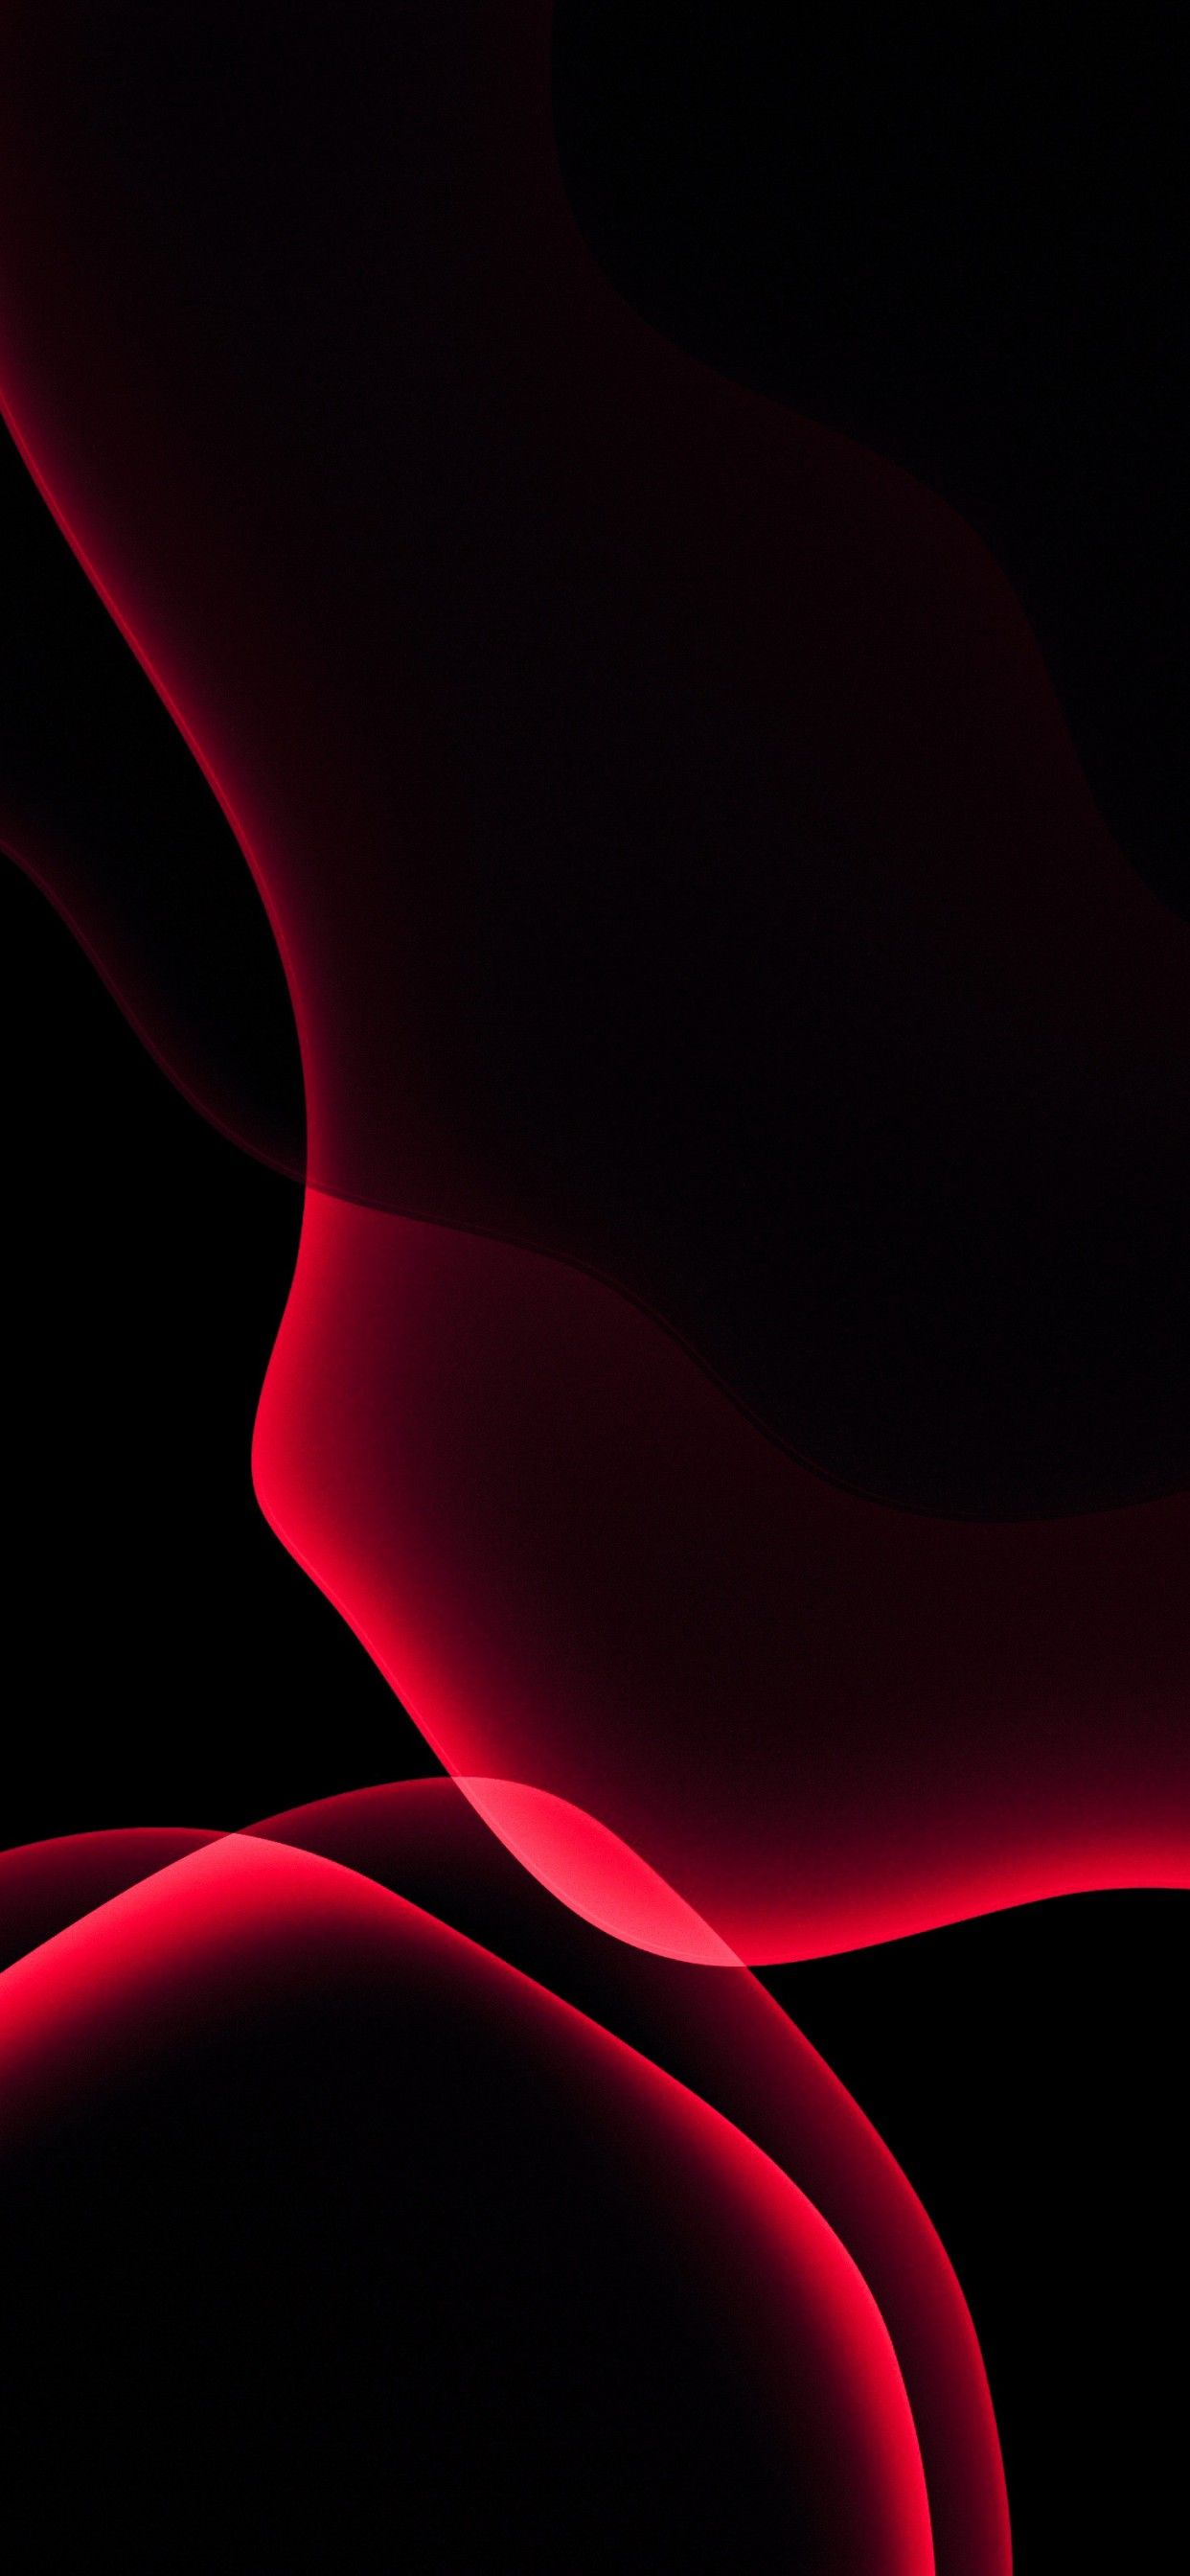 iOS 13 Wallpaper 4K, Stock, iPadOS, Red, Black background, AMOLED, HD, Abstract